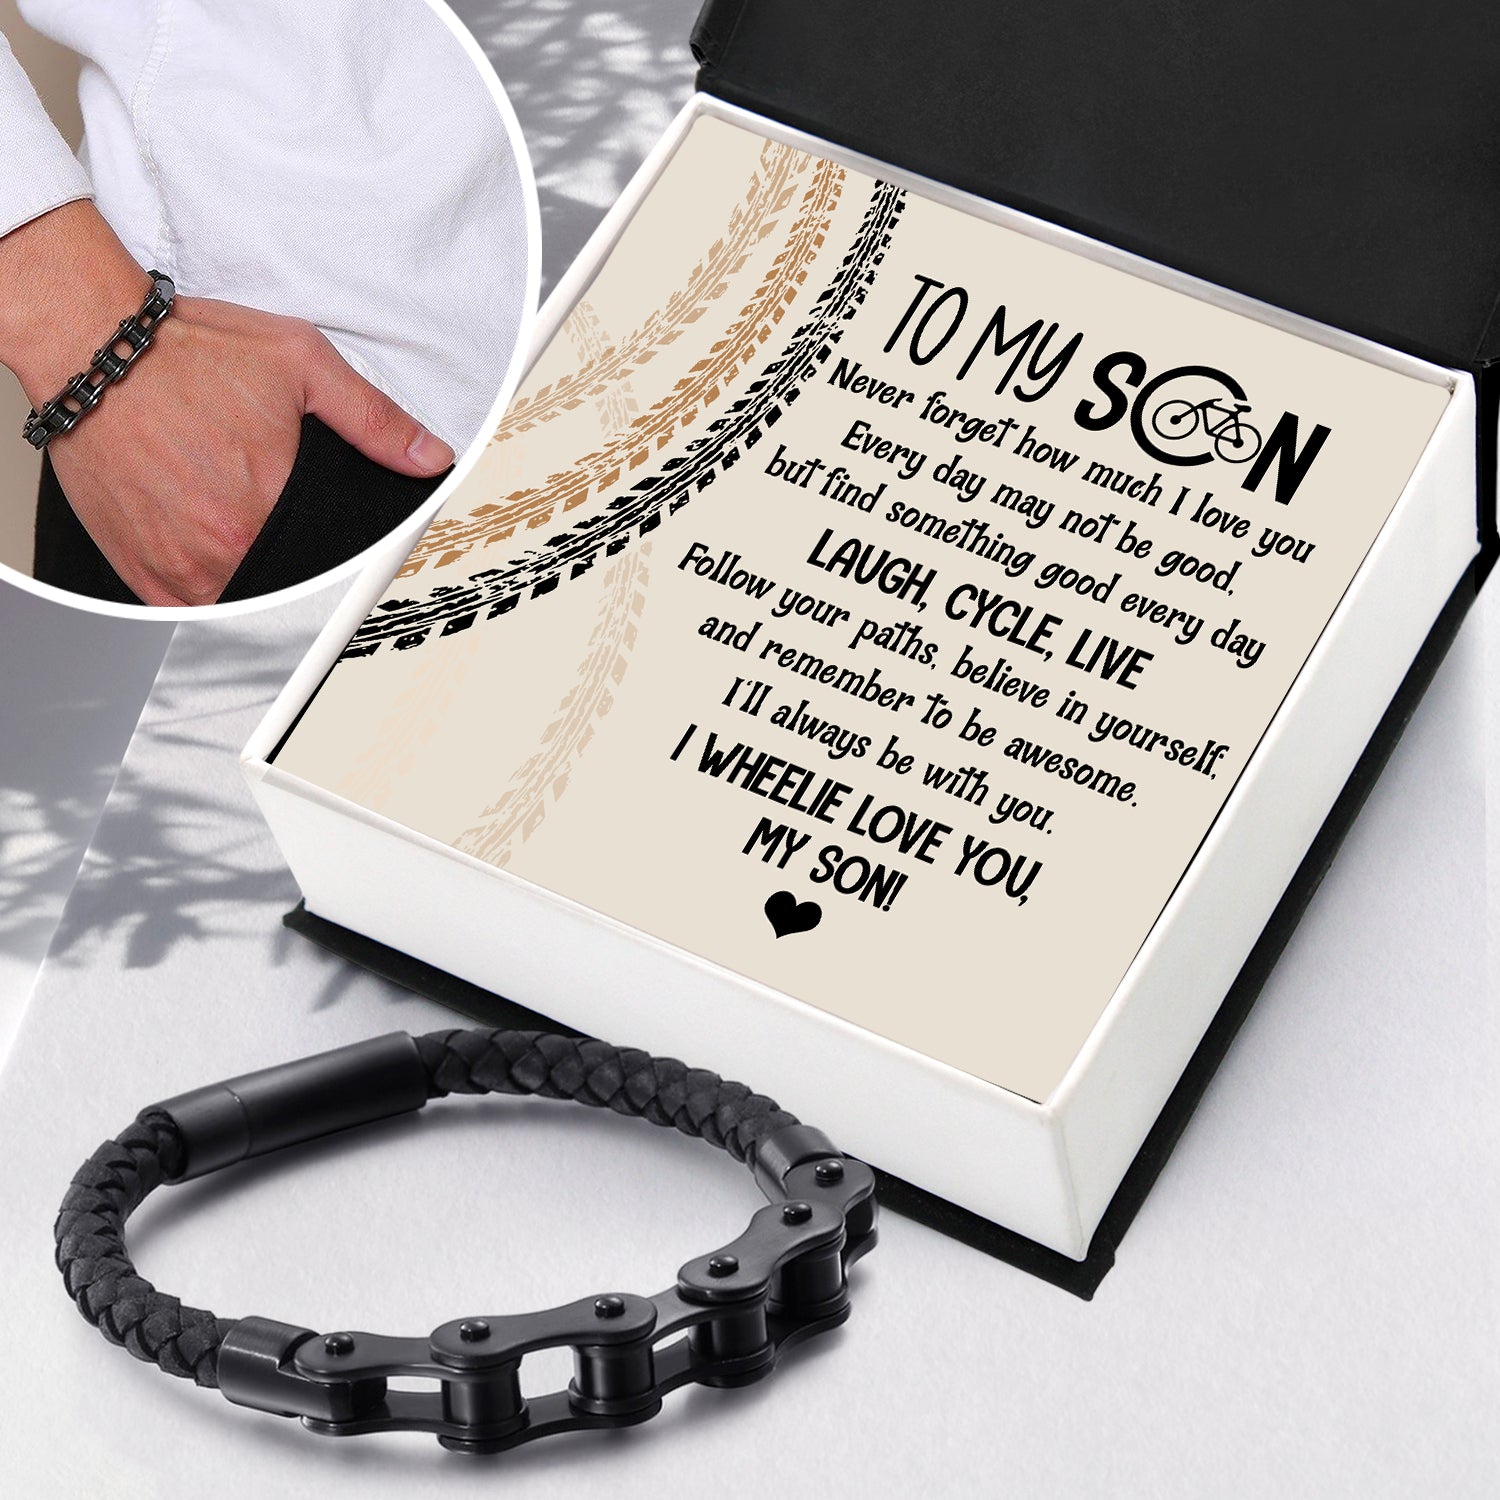 Chain Woven Leather Bracelet - Cycling - To My Son - I'll Always Be With You - Ukgbbp16001